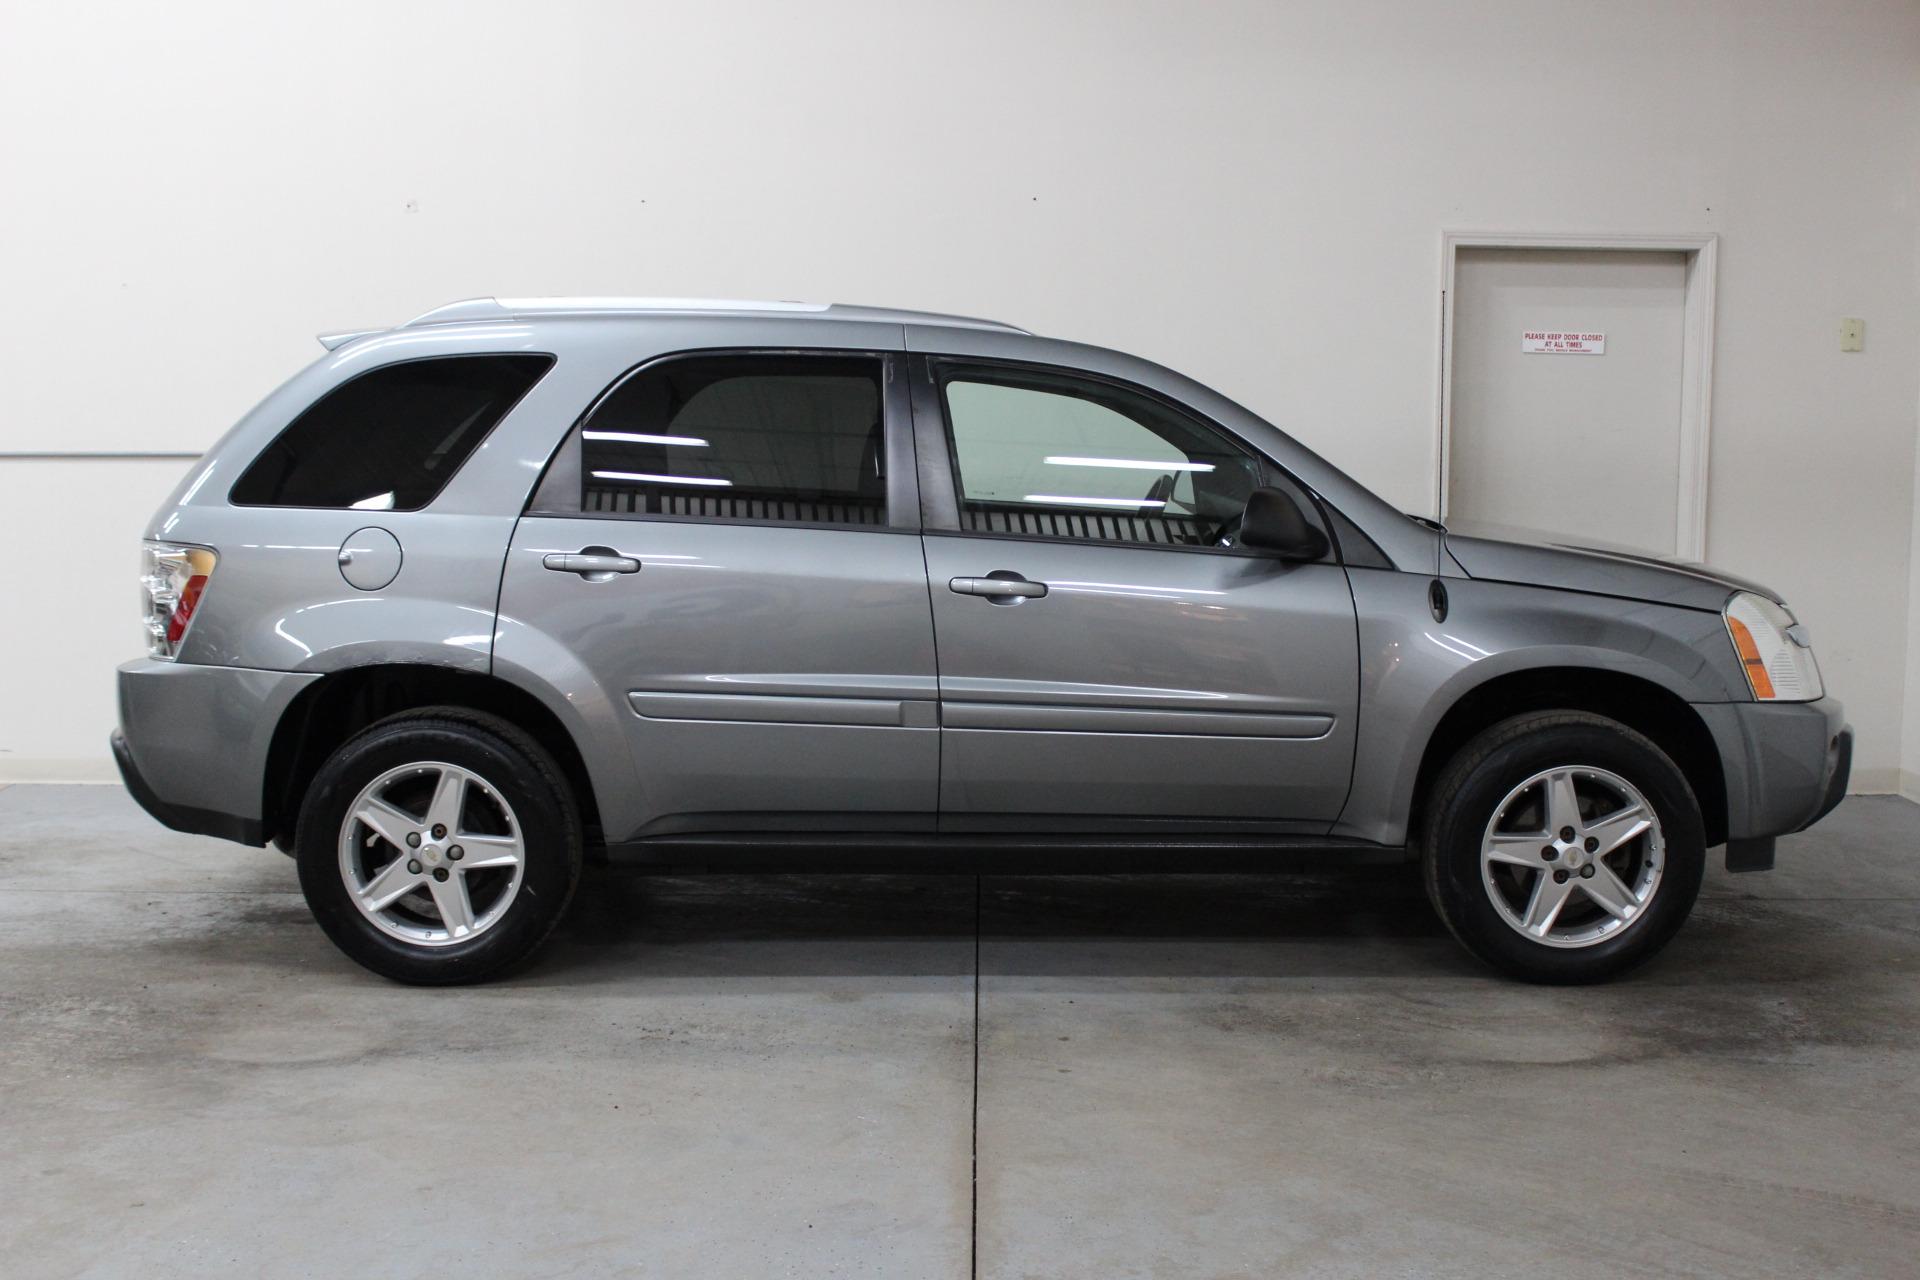 2005 chevy equinox for sale